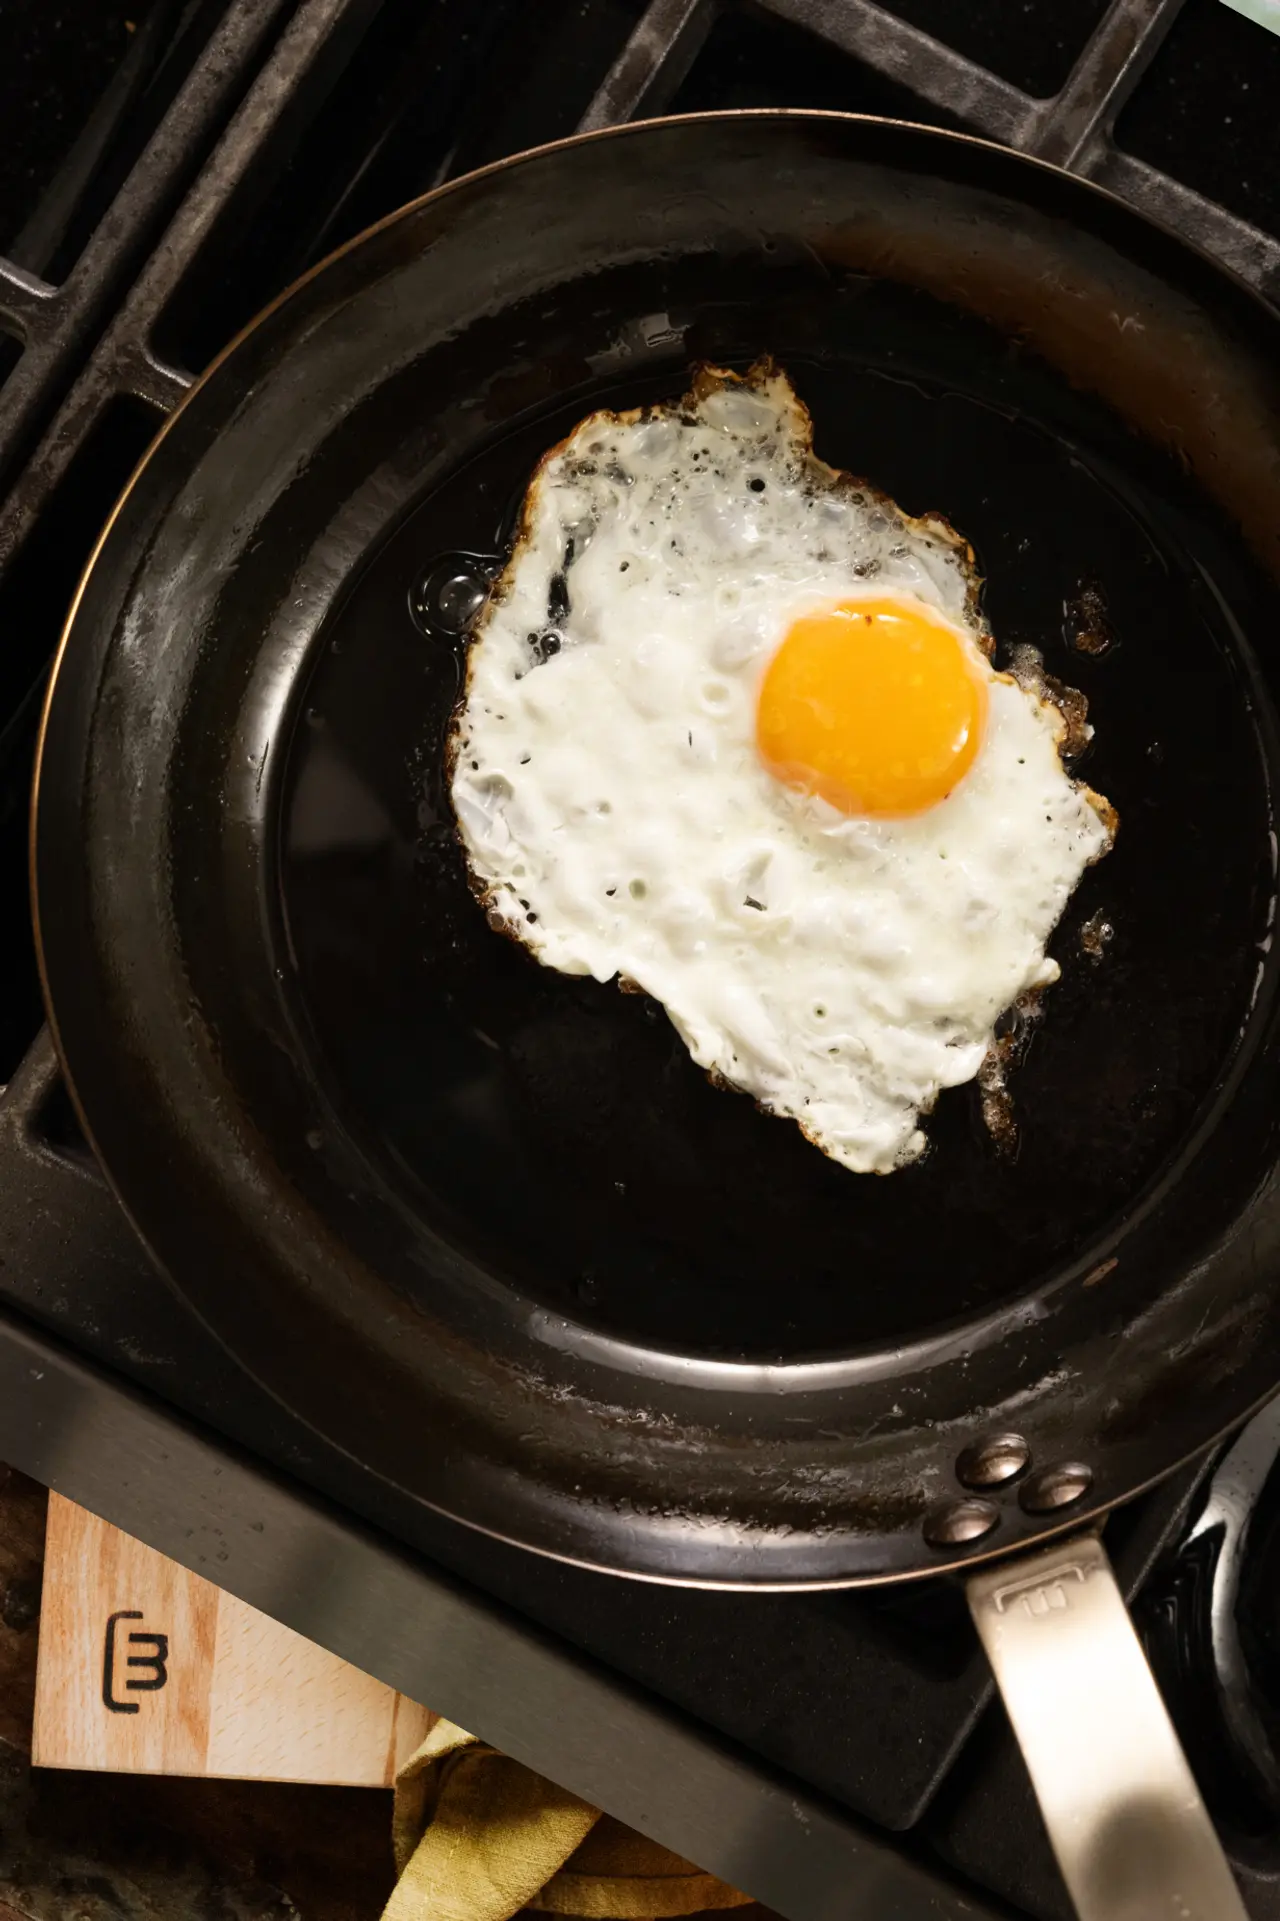 A single fried egg with a bright yellow yolk is sizzling in a black skillet on a stovetop.